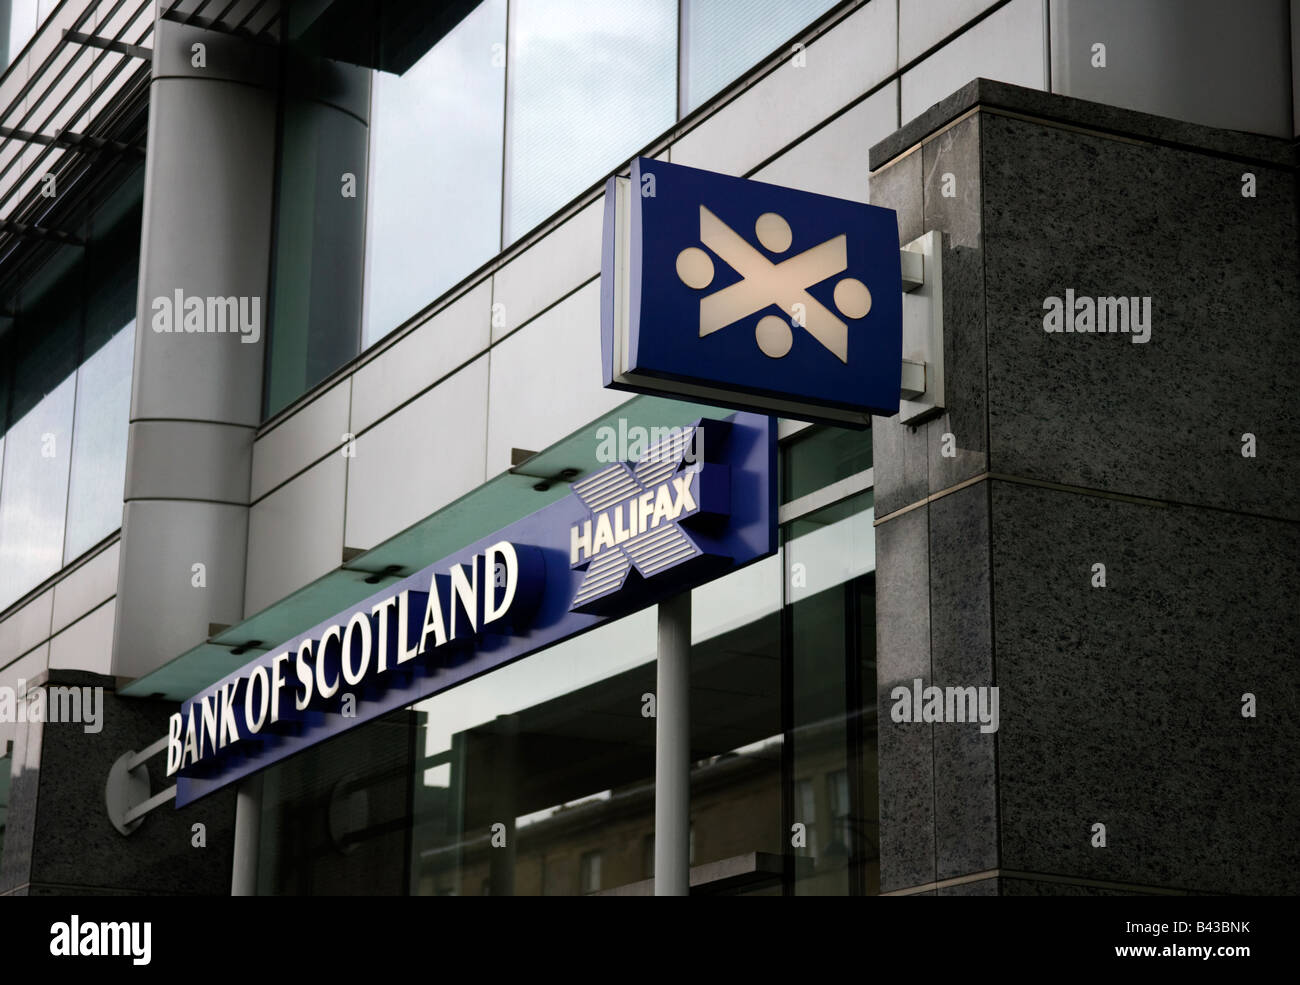 Sign for HBOS Bank of Scotland Halifax above branch in Edinburgh, before Lloyds Banking Group takeover, Scotland, UK, Europe Stock Photo